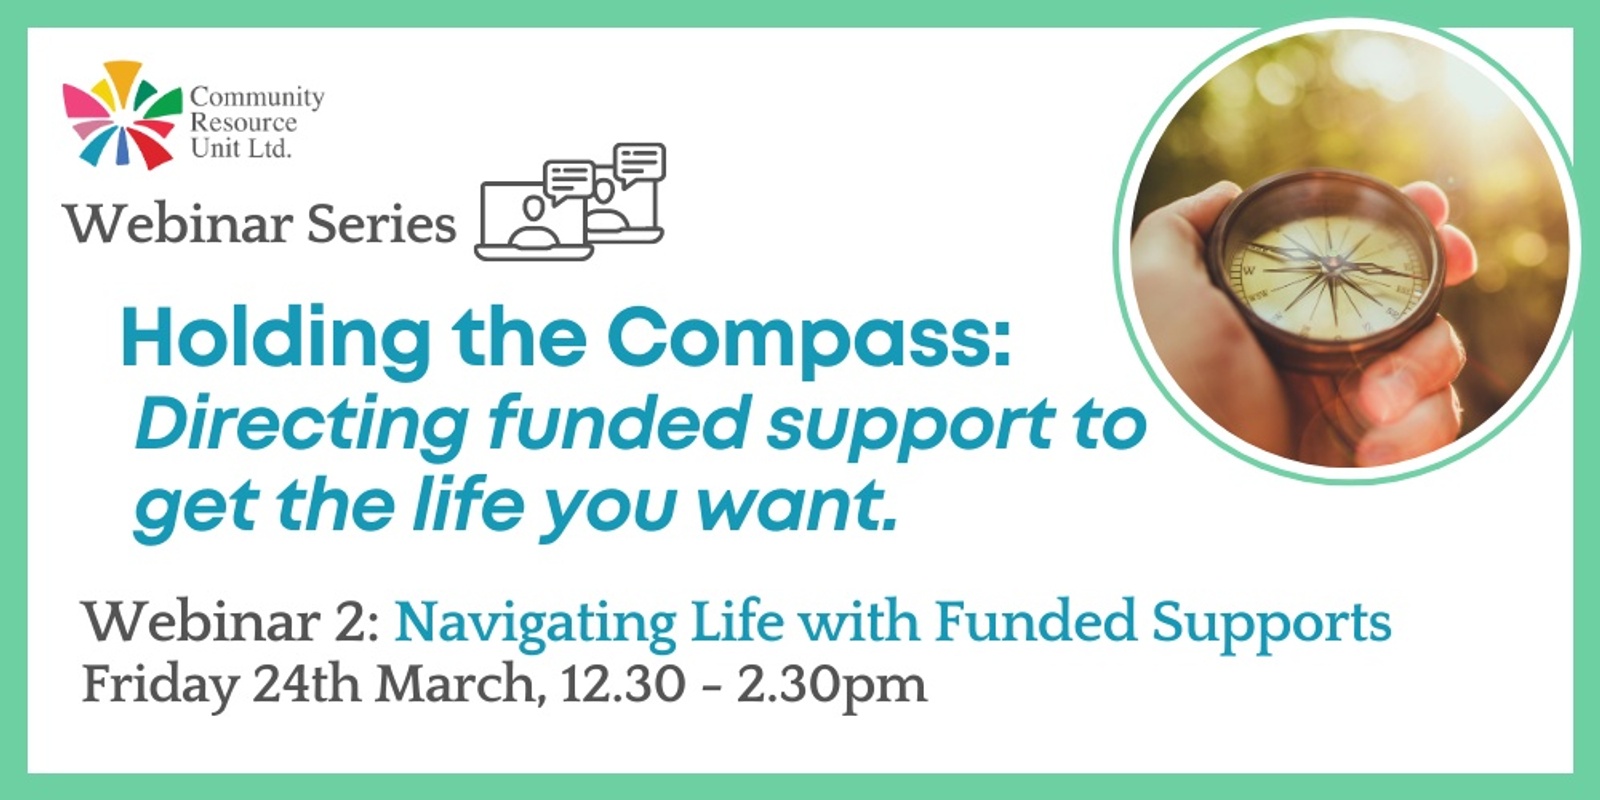 Holding the Compass Webinar 2: Navigating Life with Funded Supports